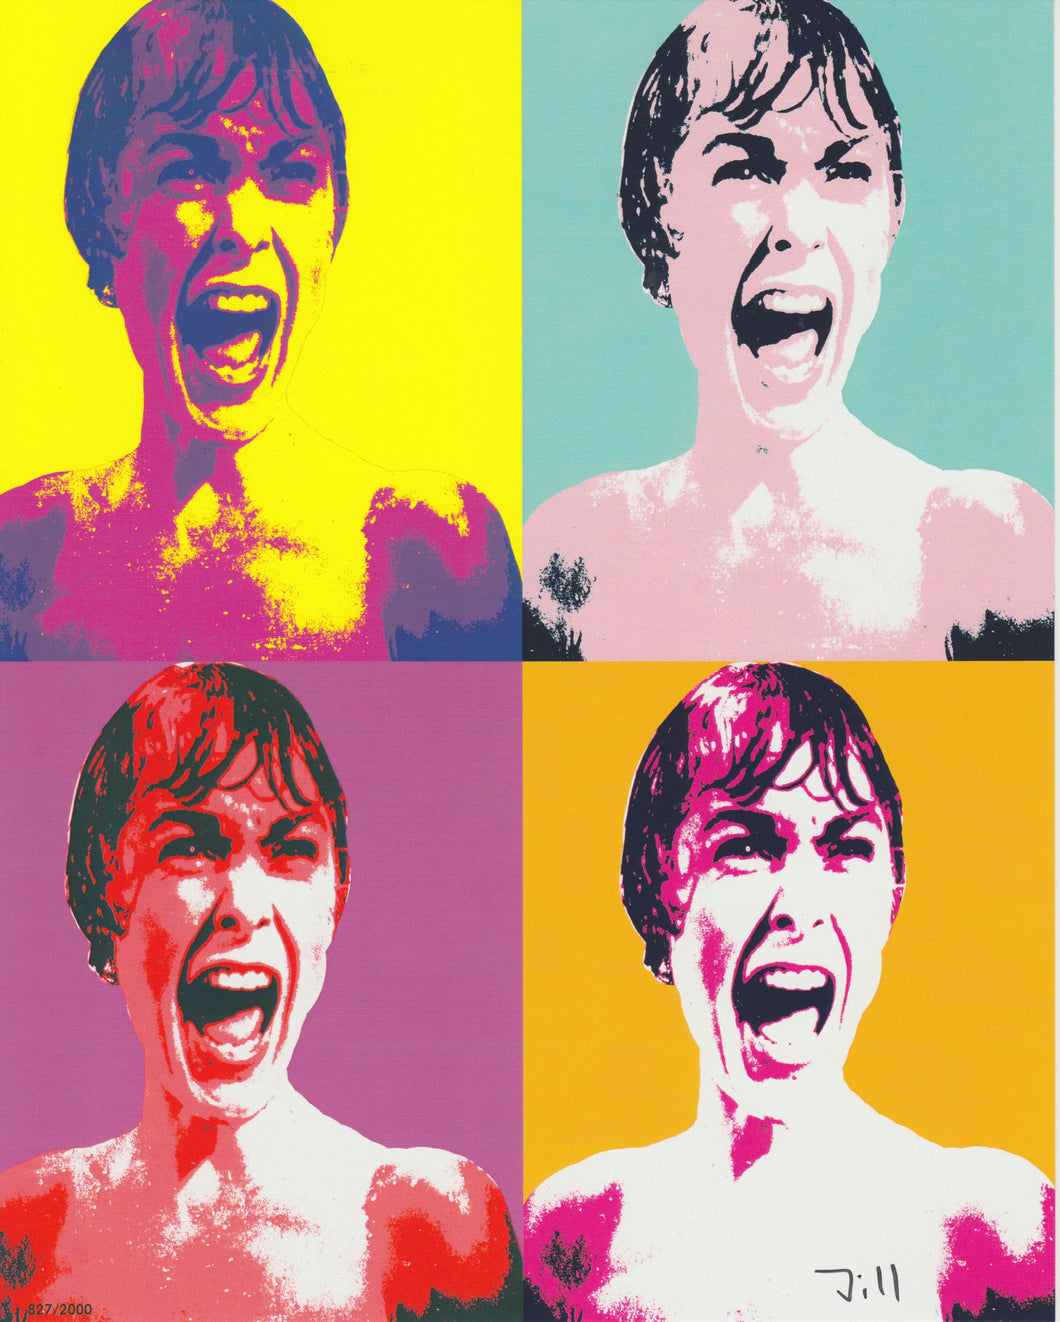 Psycho (Andy Warhol style) Art print signed by Artist Jill Kimble (number 827 of 2000)